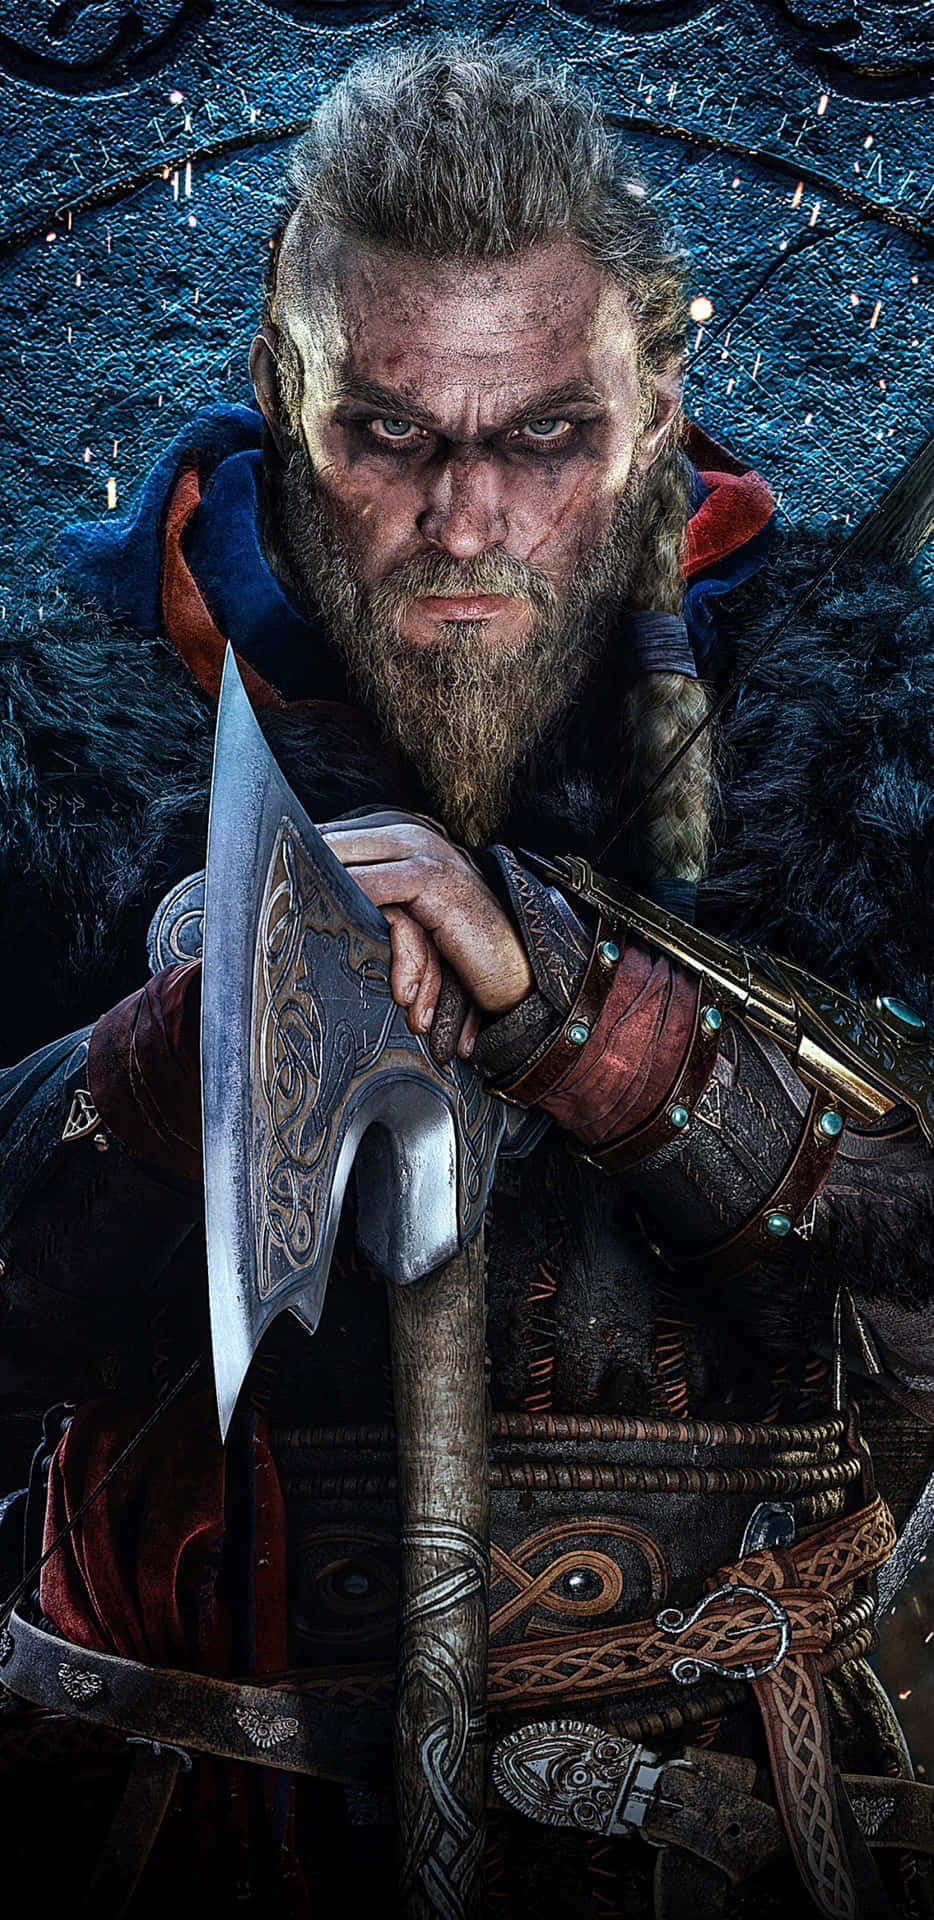 The Witcher 3 - A Man With An Axe